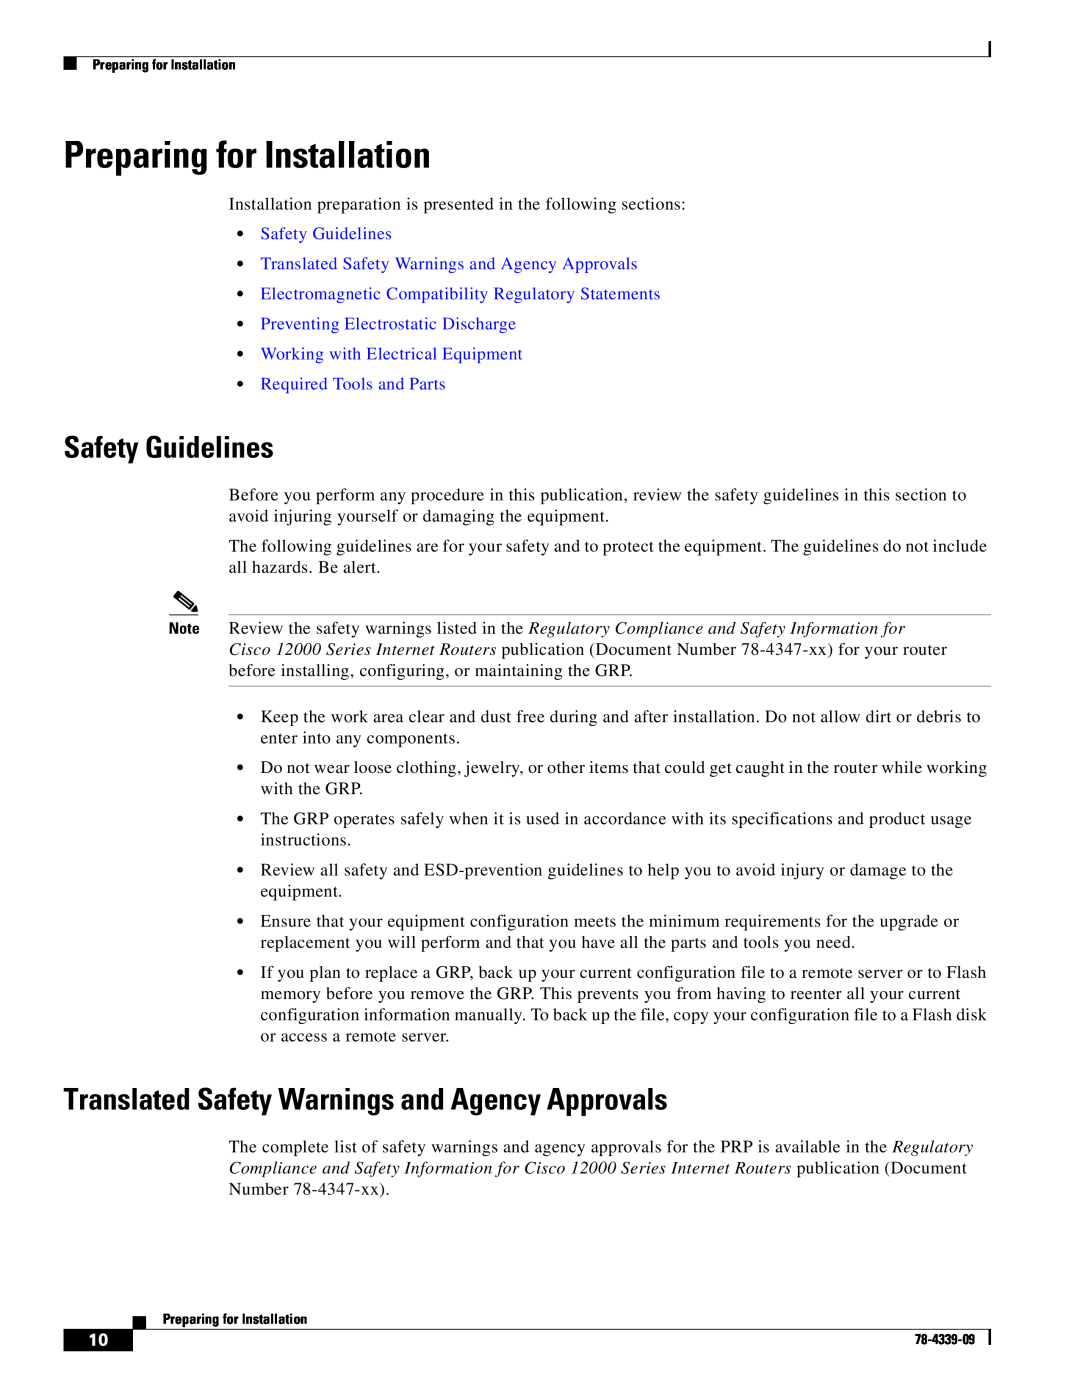 Cisco Systems GRP-B manual Preparing for Installation, Safety Guidelines, Translated Safety Warnings and Agency Approvals 